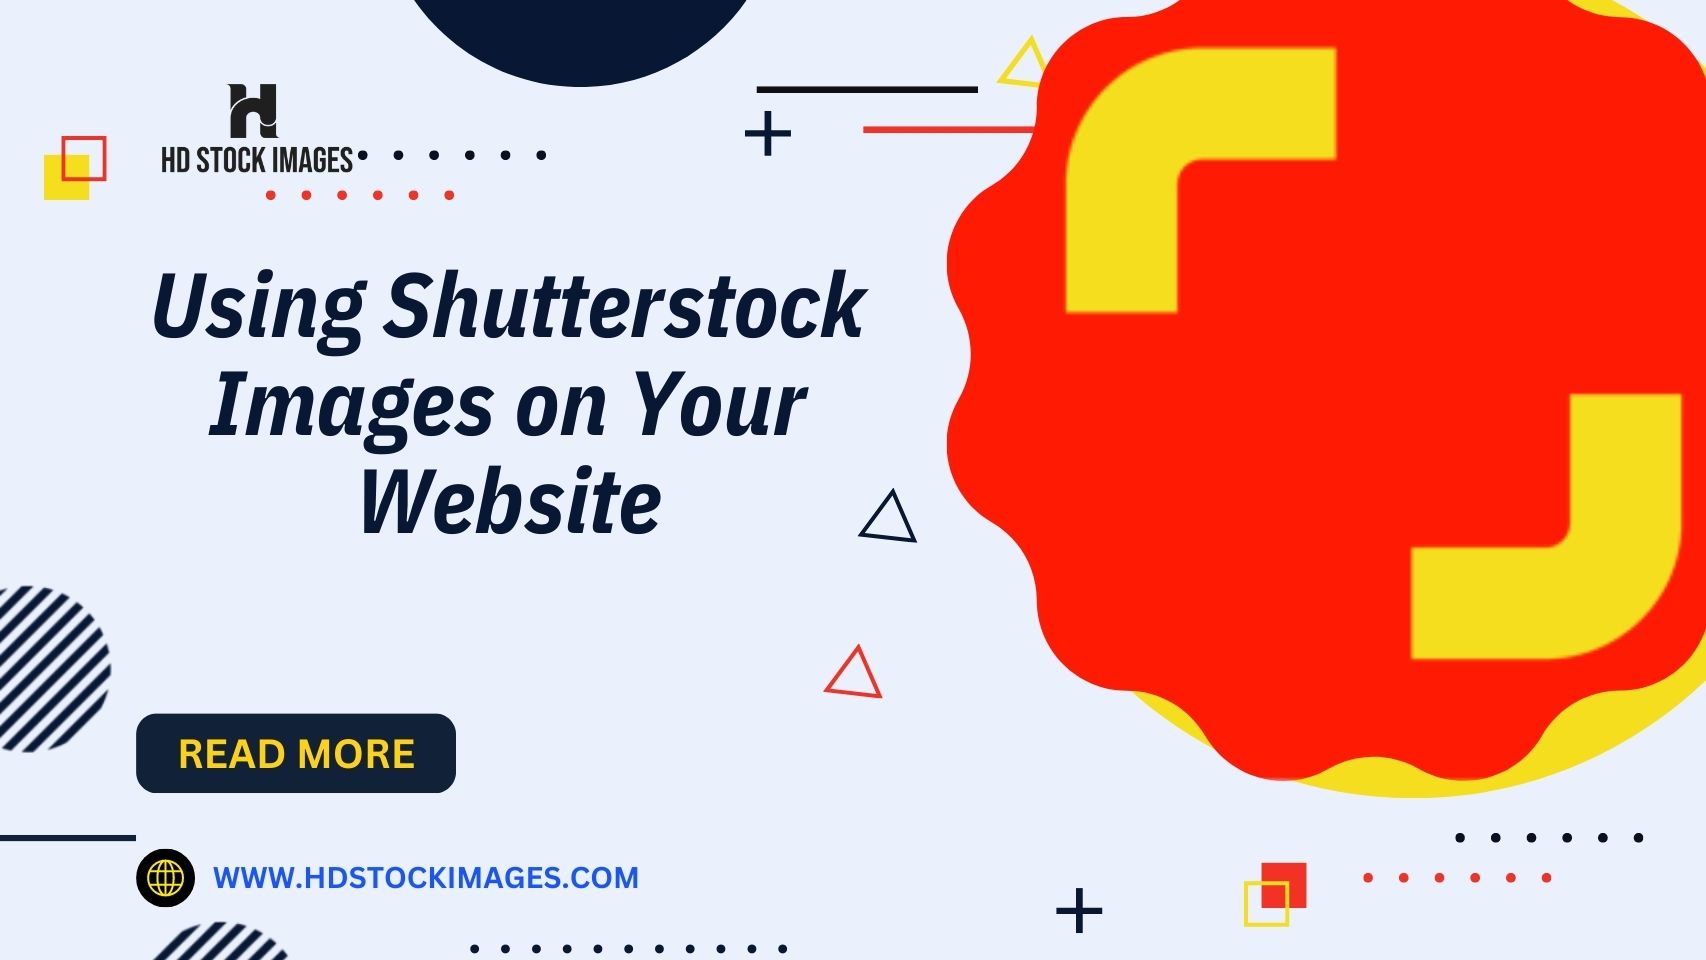 Using Shutterstock Images on Your Website: Guidelines for Incorporating Copyrighted Content